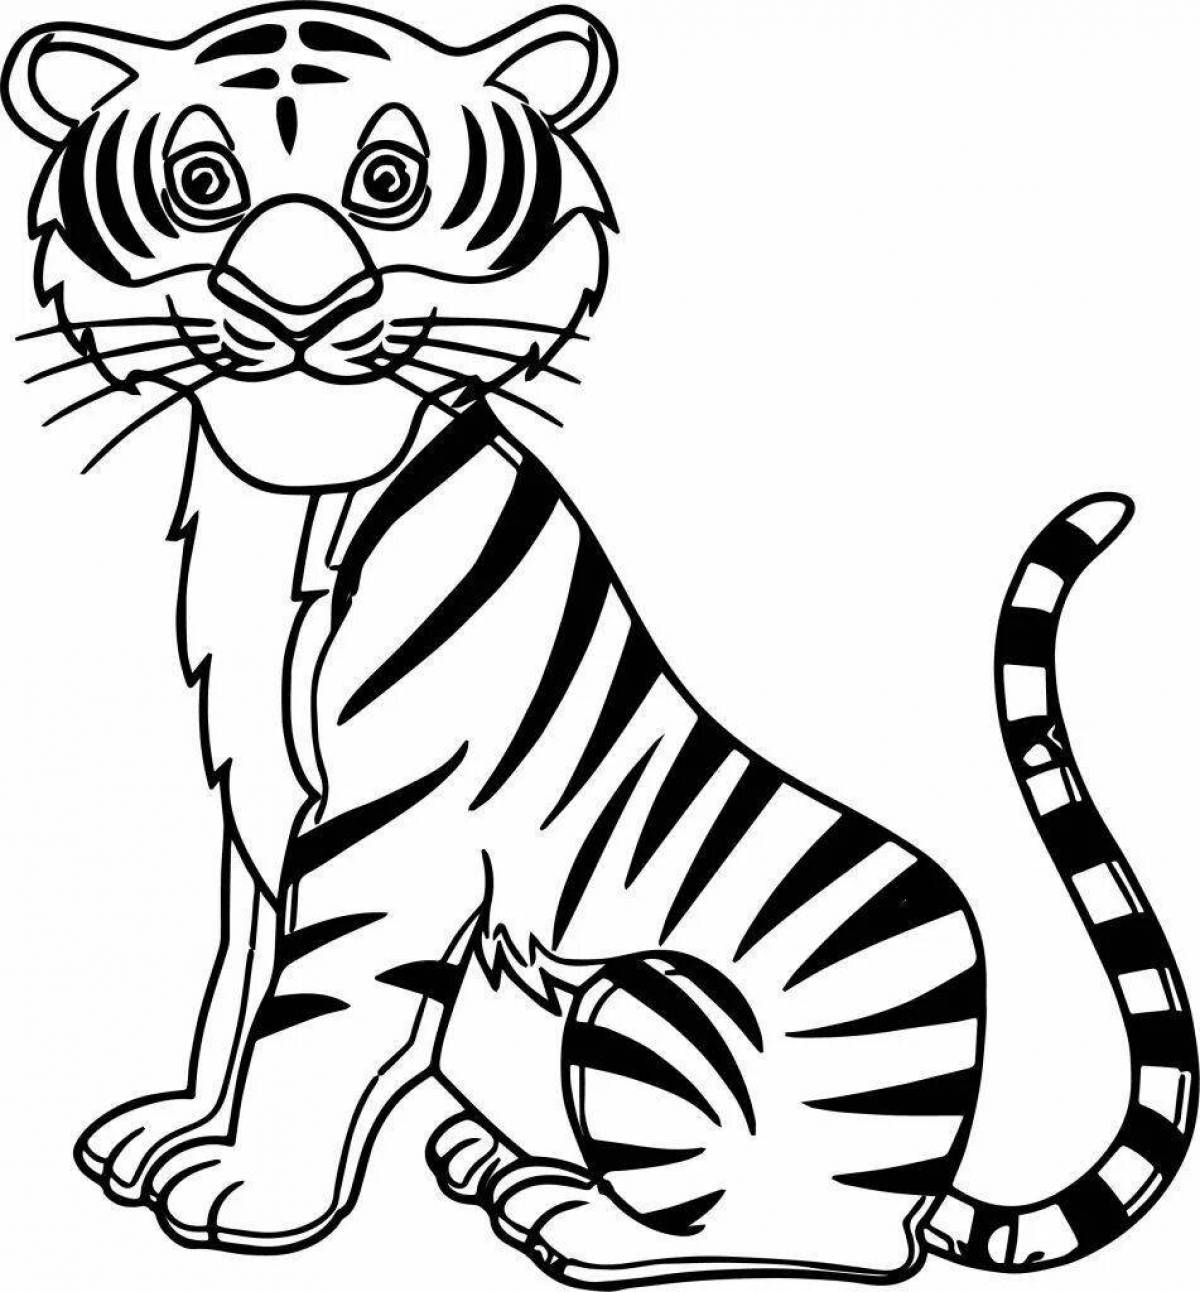 Live tiger coloring book for kids